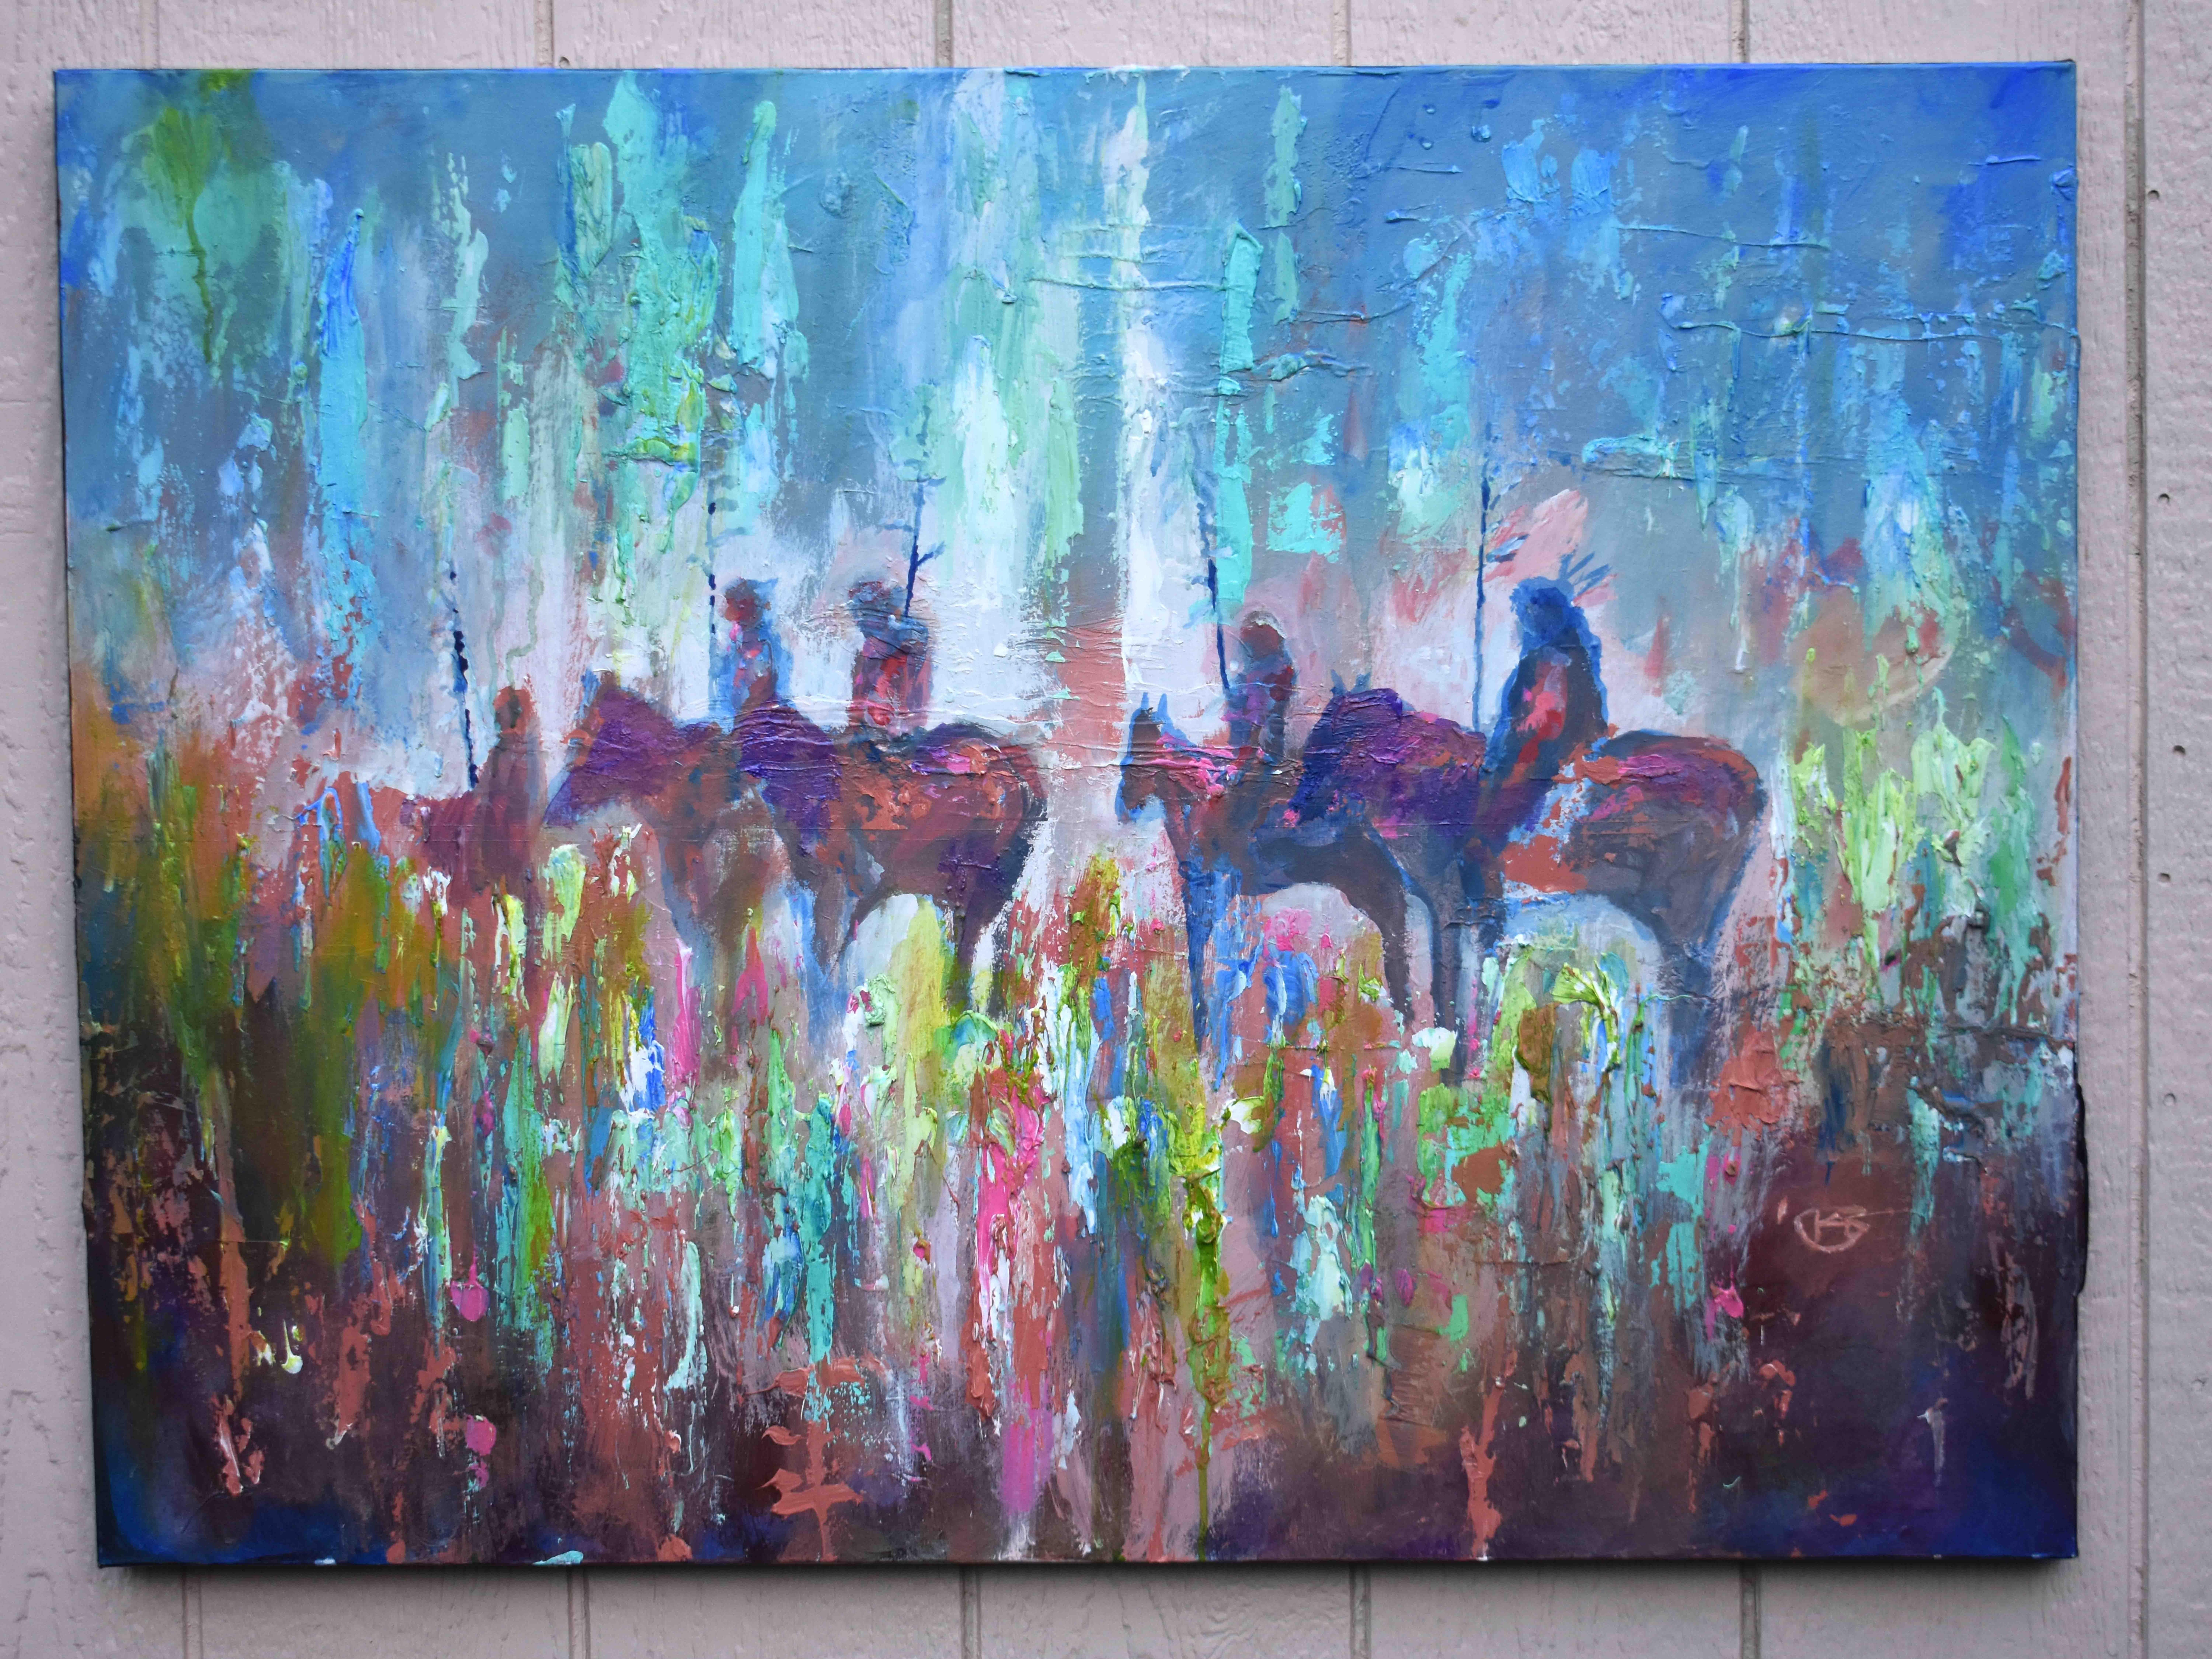 <p>Artist Comments<br>Artist Kip Decker captures a dreamlike scene of Native Americans on horseback, pausing to survey their onward journey. Their graceful silhouettes stand out prominently against the textured backdrop, where the vibrant colors of